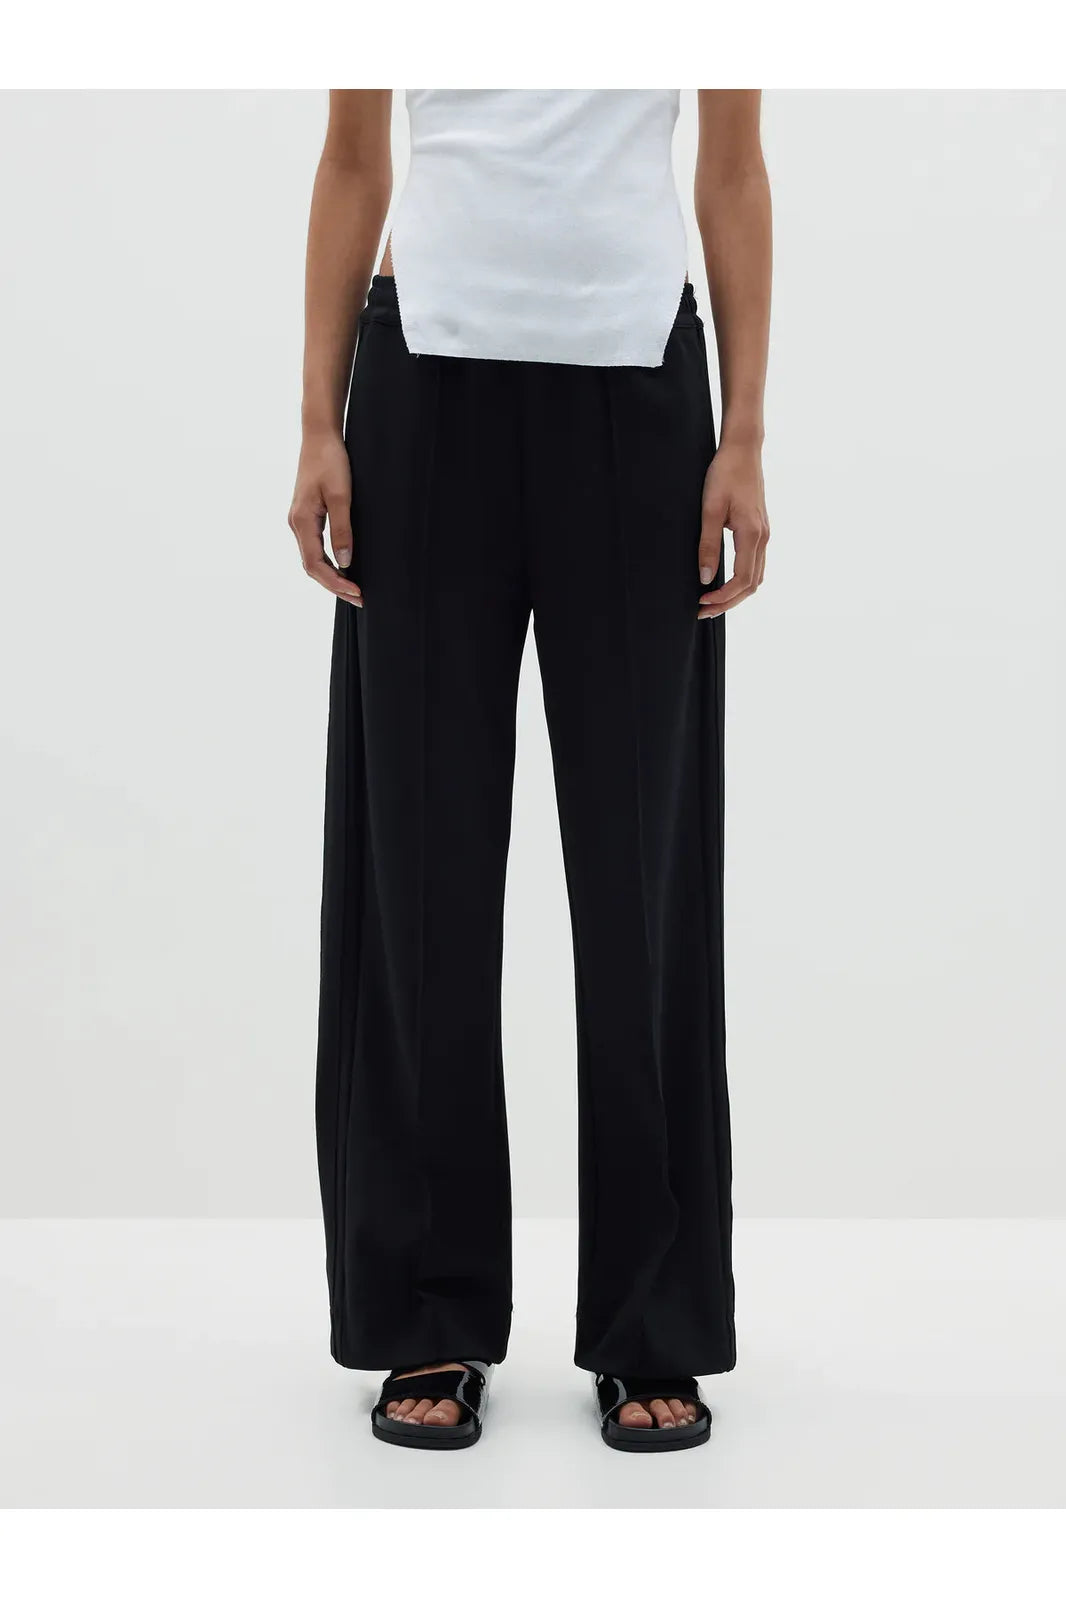 Twill Pinstitch Detail Pant in Black by Bassike